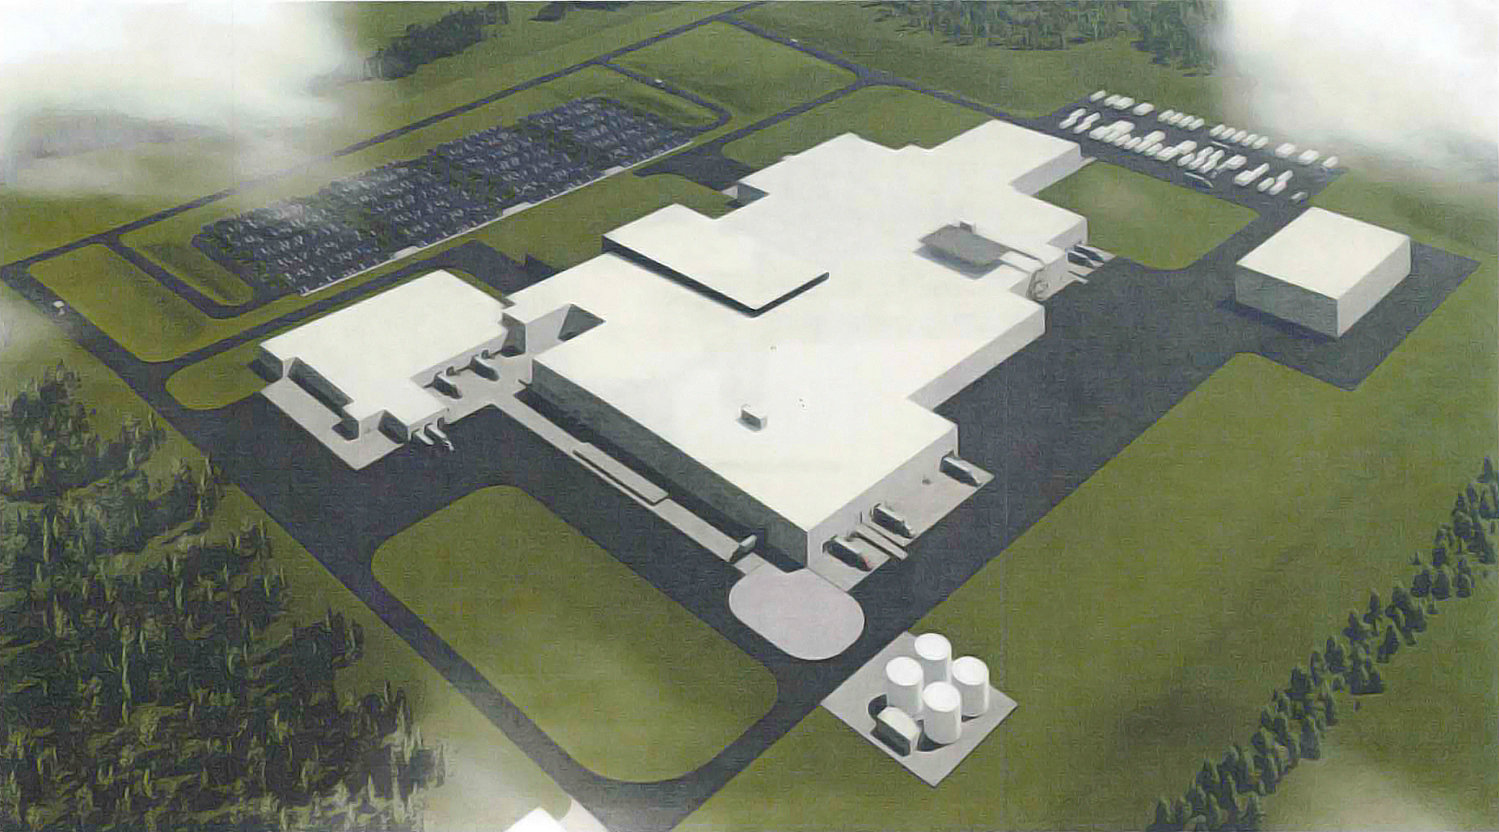 This computer rendering shows the basic exterior layout of a proposed 500,000-square-foot beef processing plant outside Foristell.